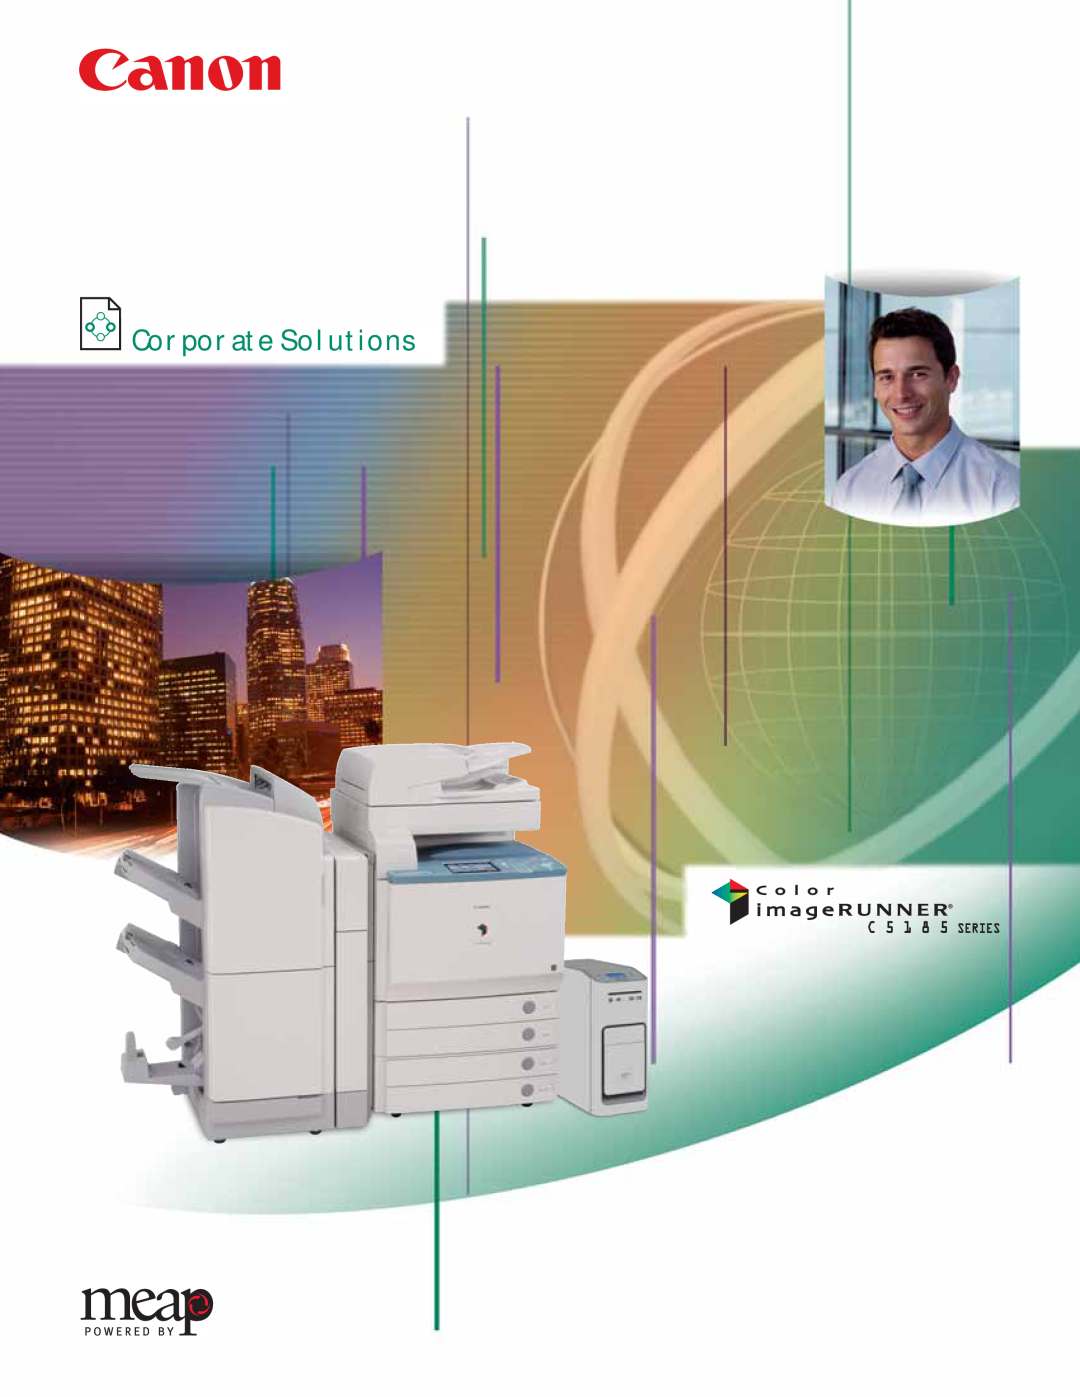 Canon C5185 manual Corporate Solutions 